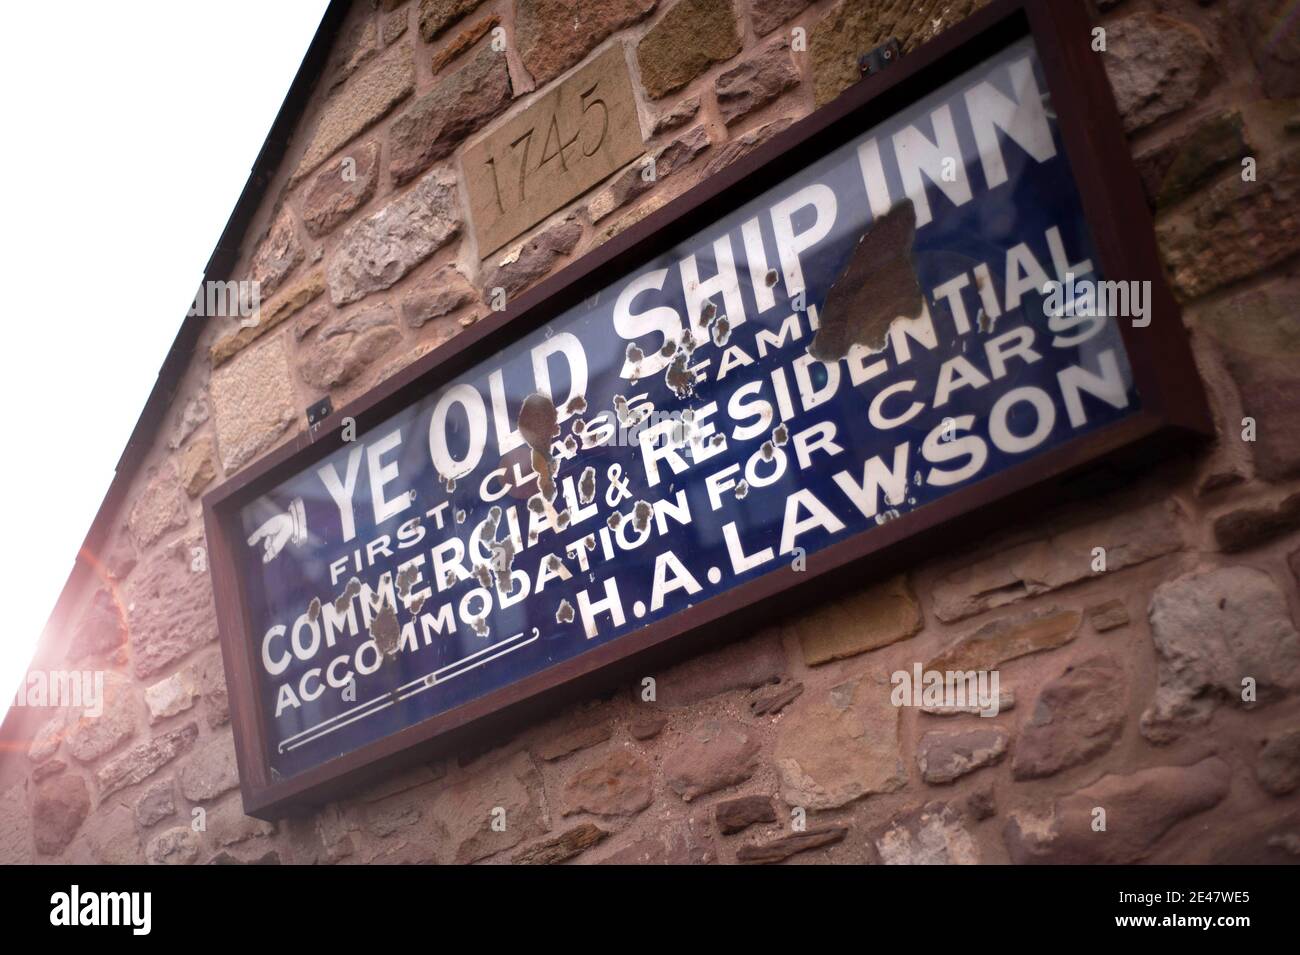 Worn ceramic sign for The Olde Ship. Seahouses Stock Photo